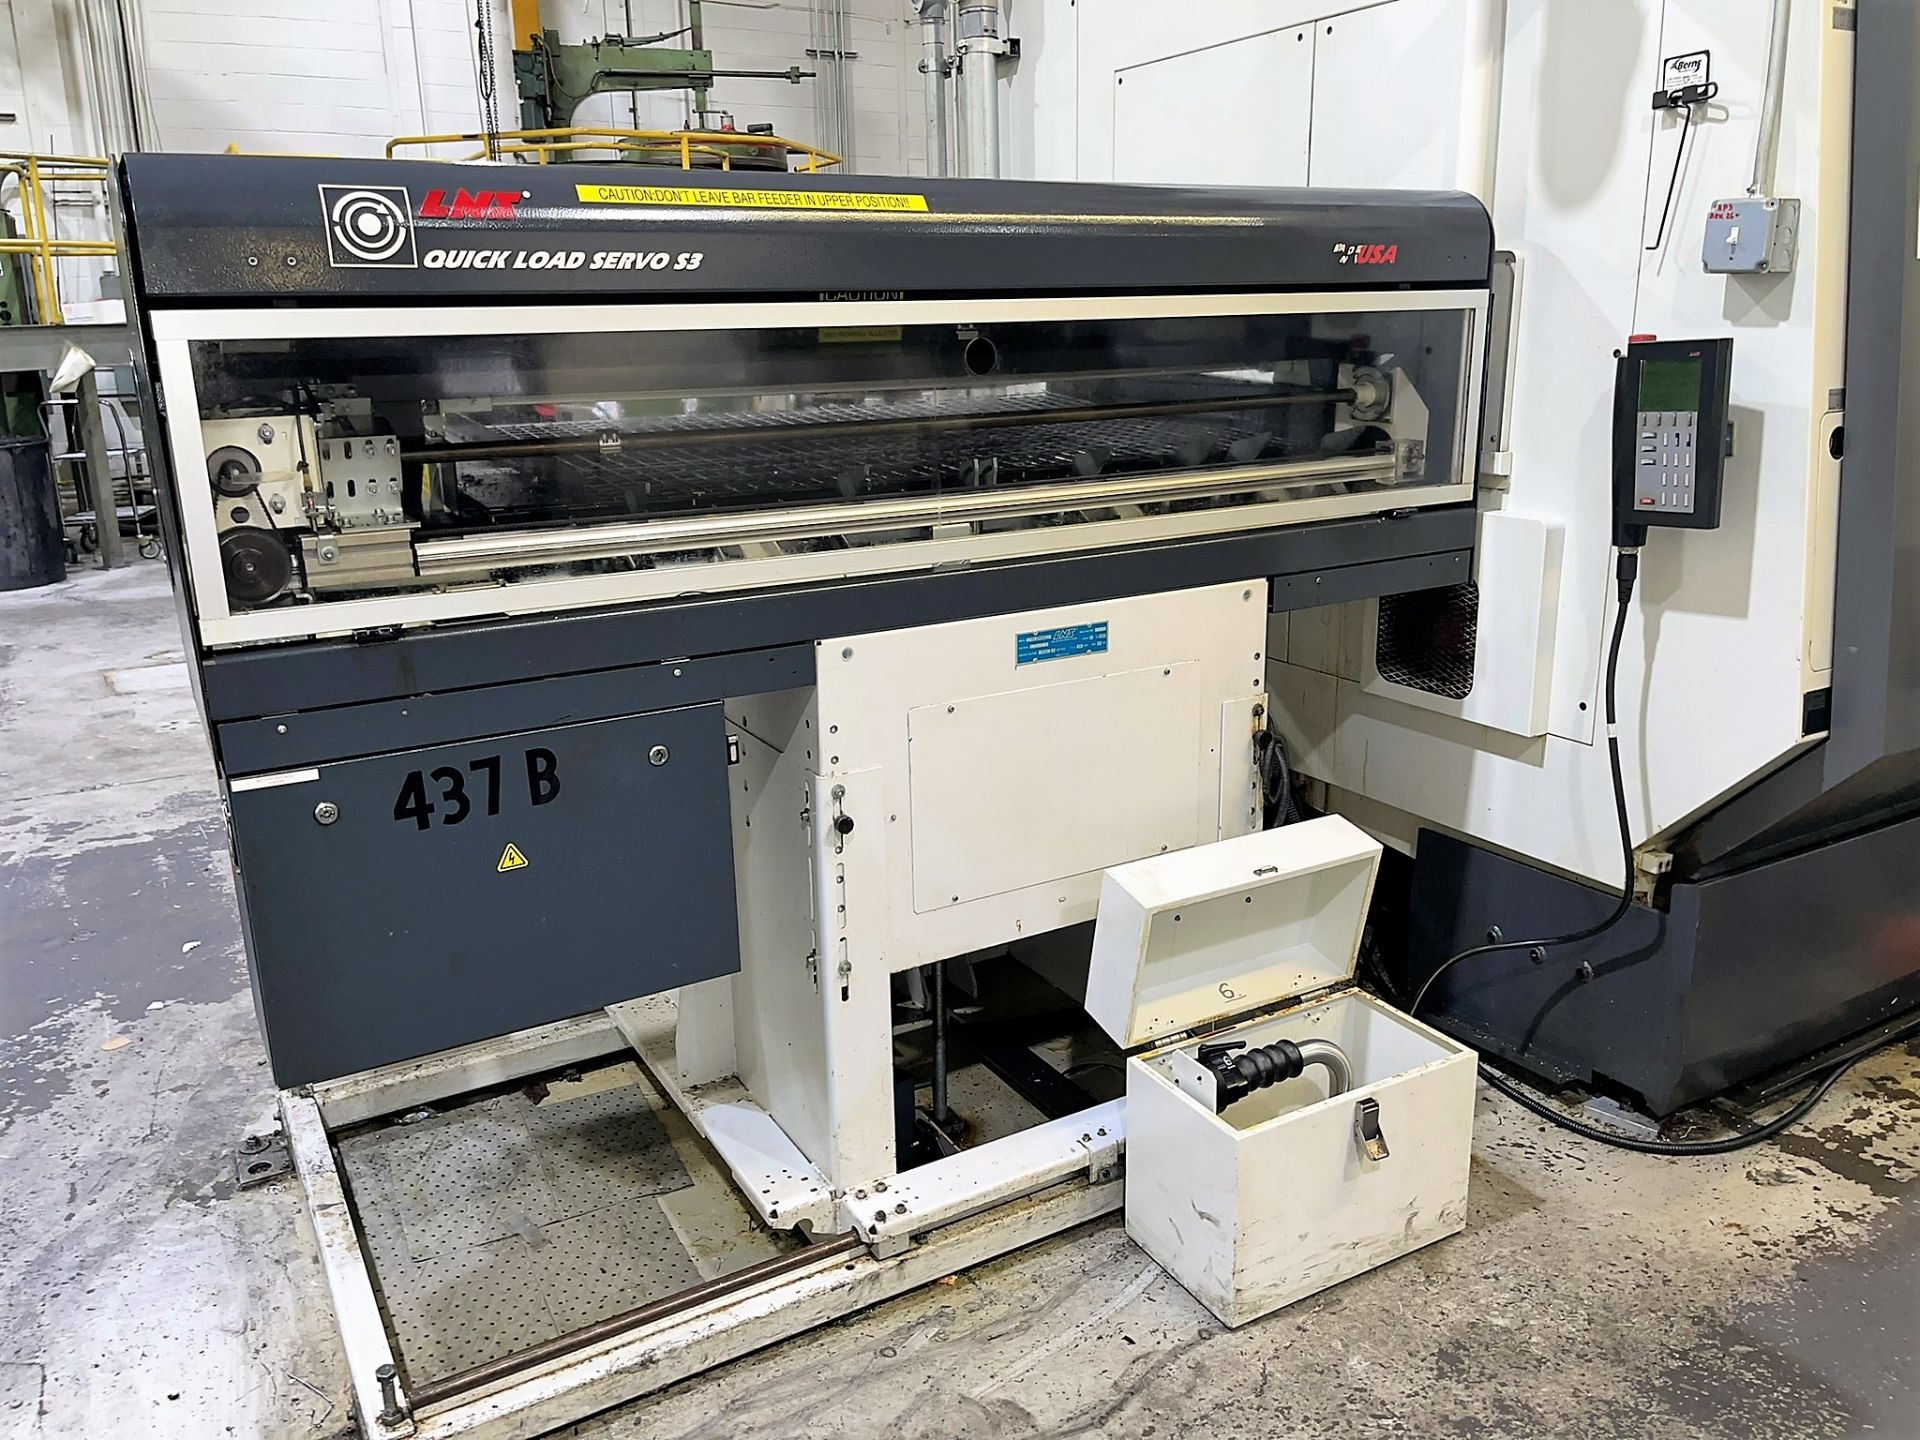 2012 Nakamura Super-Mill WY-250L 10-Axis CNC Turning/Milling Center, S/N N280204 - Image 13 of 22